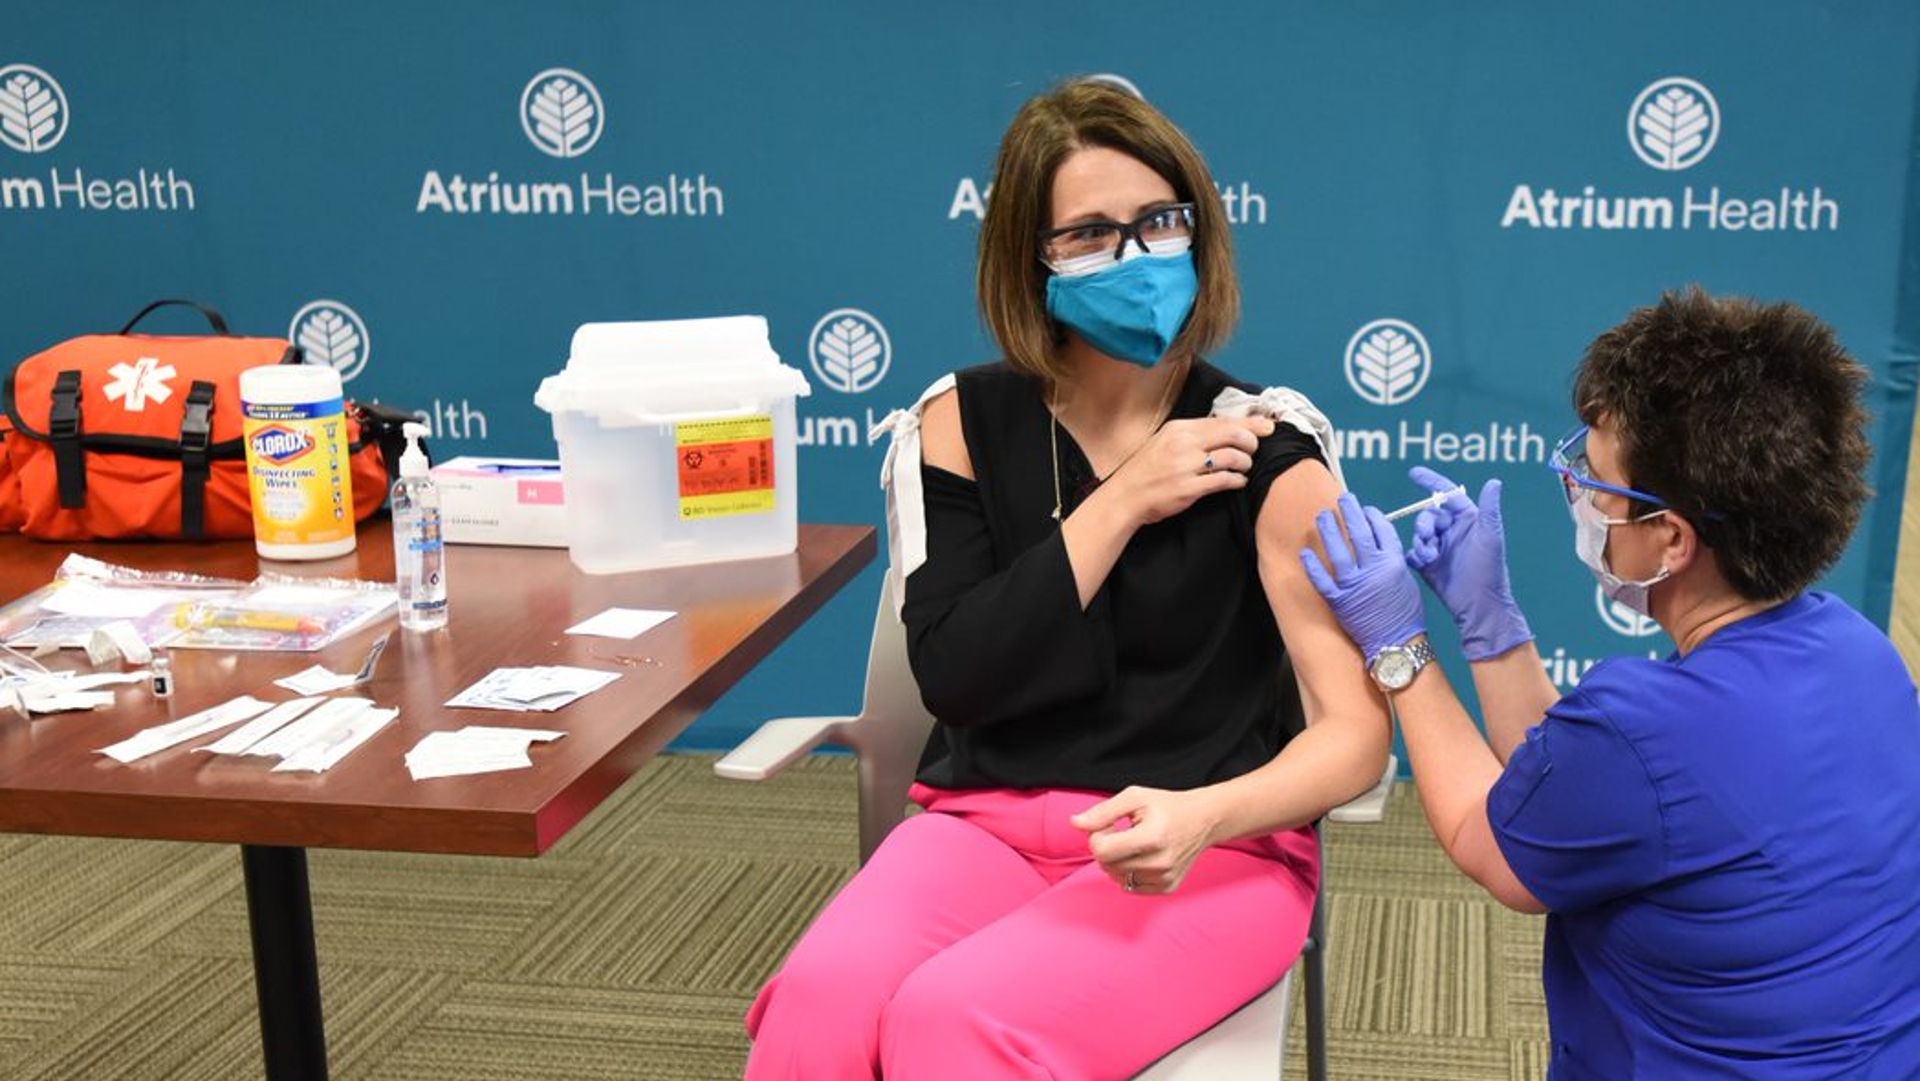 On December 14, 2020, nine months after the World Health Organization declared SARS-CoV-2, or COVID-19, a pandemic, Dr. Katie Passaretti, Atrium Health vice president and enterprise chief epidemiologist, became the first person in the state of North Carolina to receive a COVID-19 vaccine. One year later, she recalls the moment that changed the course of the pandemic.  